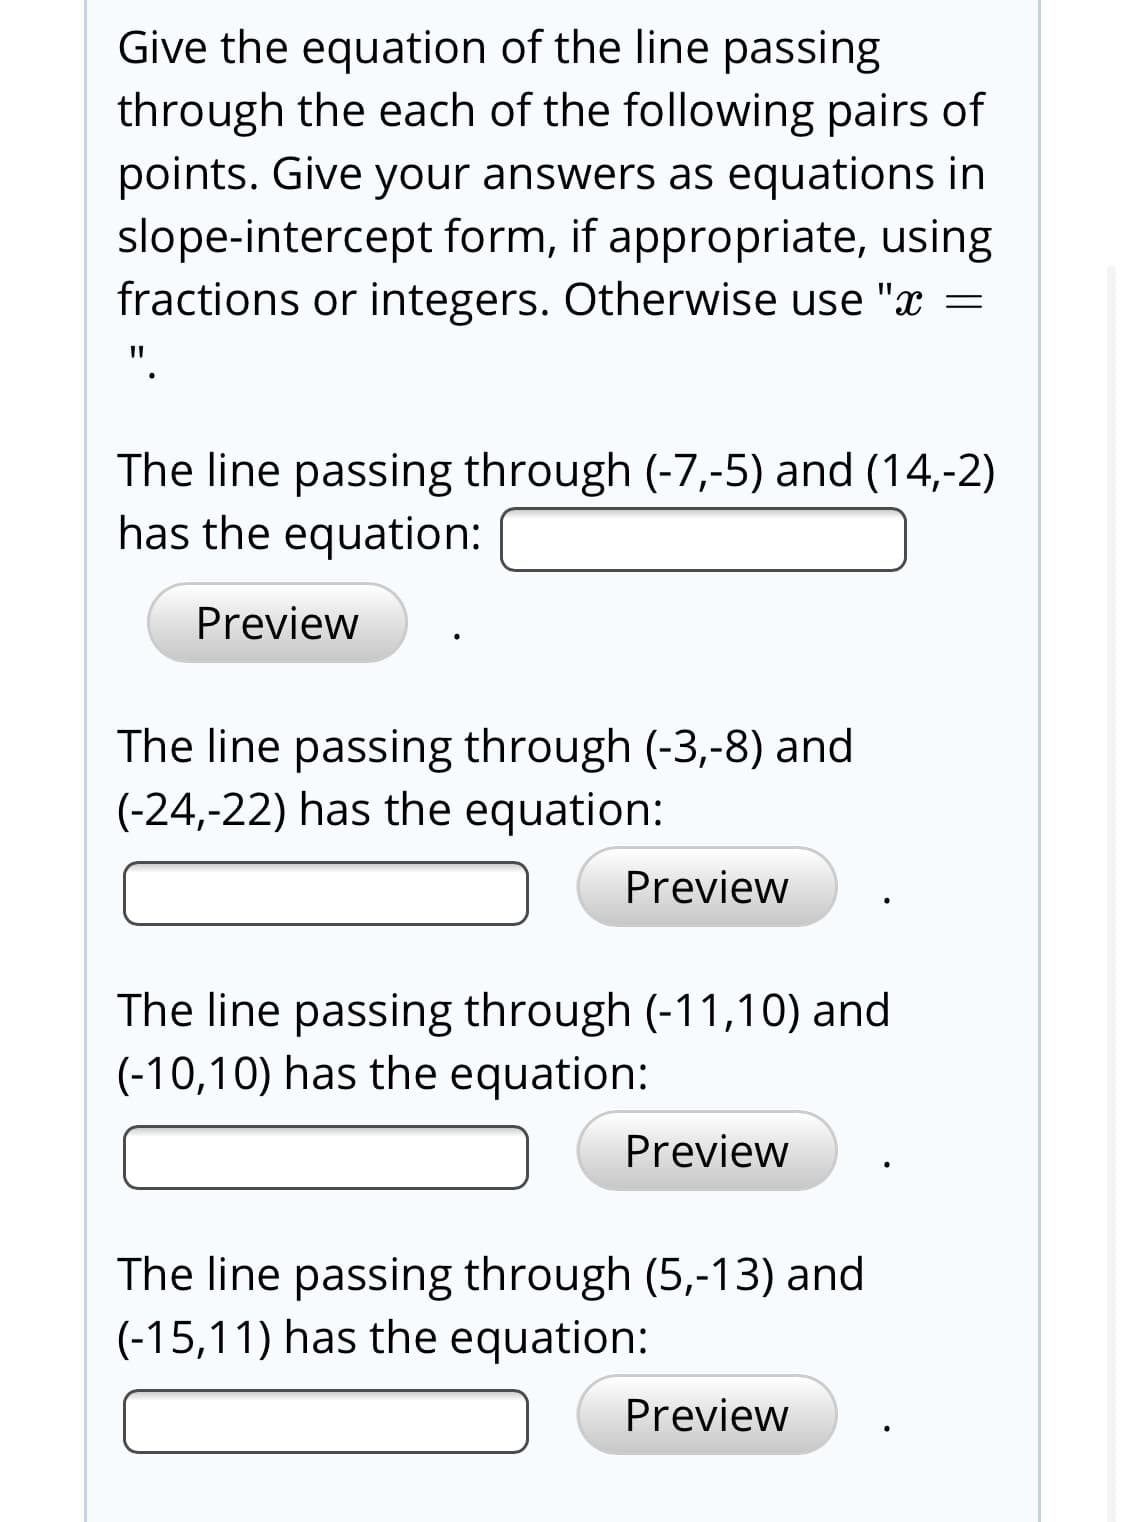 Give the equation of the line passing
through the each of the following pairs of
points. Give your answers as equations in
slope-intercept form, if appropriate, using
fractions or integers. Otherwise use "x =
The line passing through (-7,-5) and (14,-2)
has the equation:
Preview
The line passing through (-3,-8) and
(-24,-22) has the equation:
Preview
The line passing through (-11,10) and
(-10,10) has the equation:
Preview
The line passing through (5,-13) and
(-15,11) has the equation:
Preview
